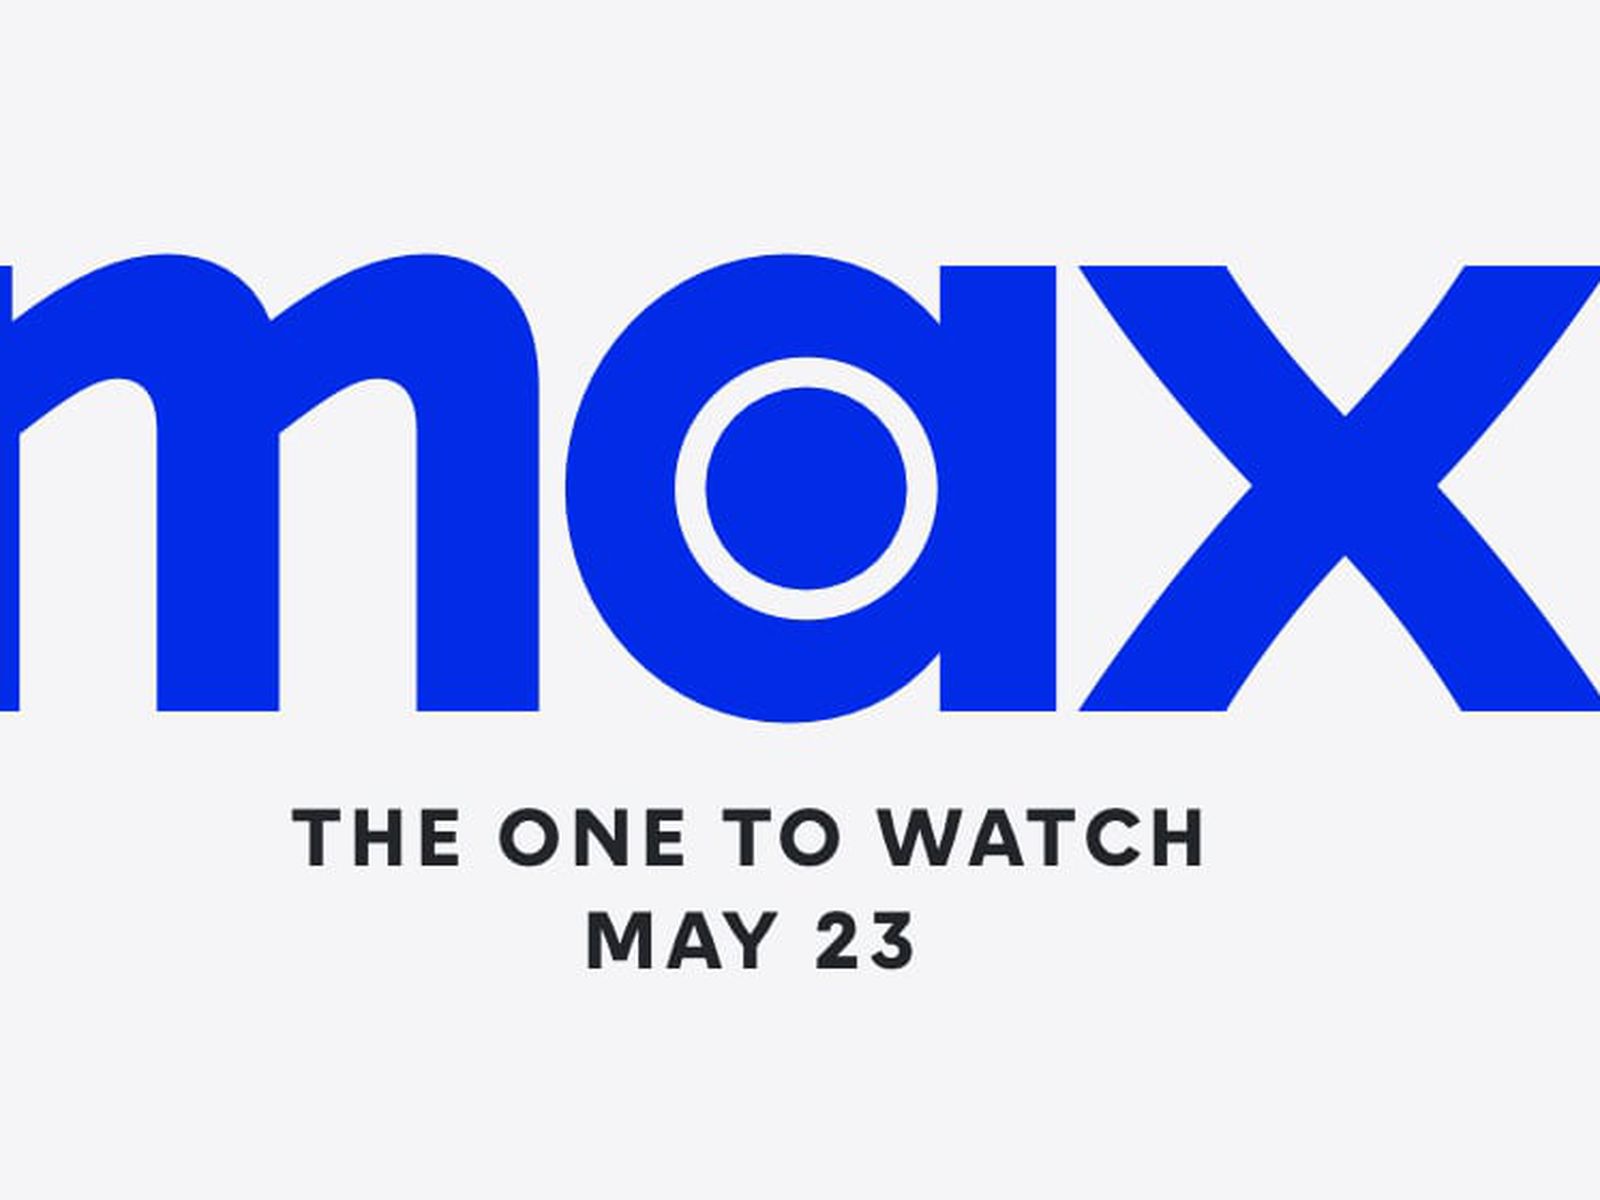 HBO Max Price Increase Announced Despite Removing WB's Own Content